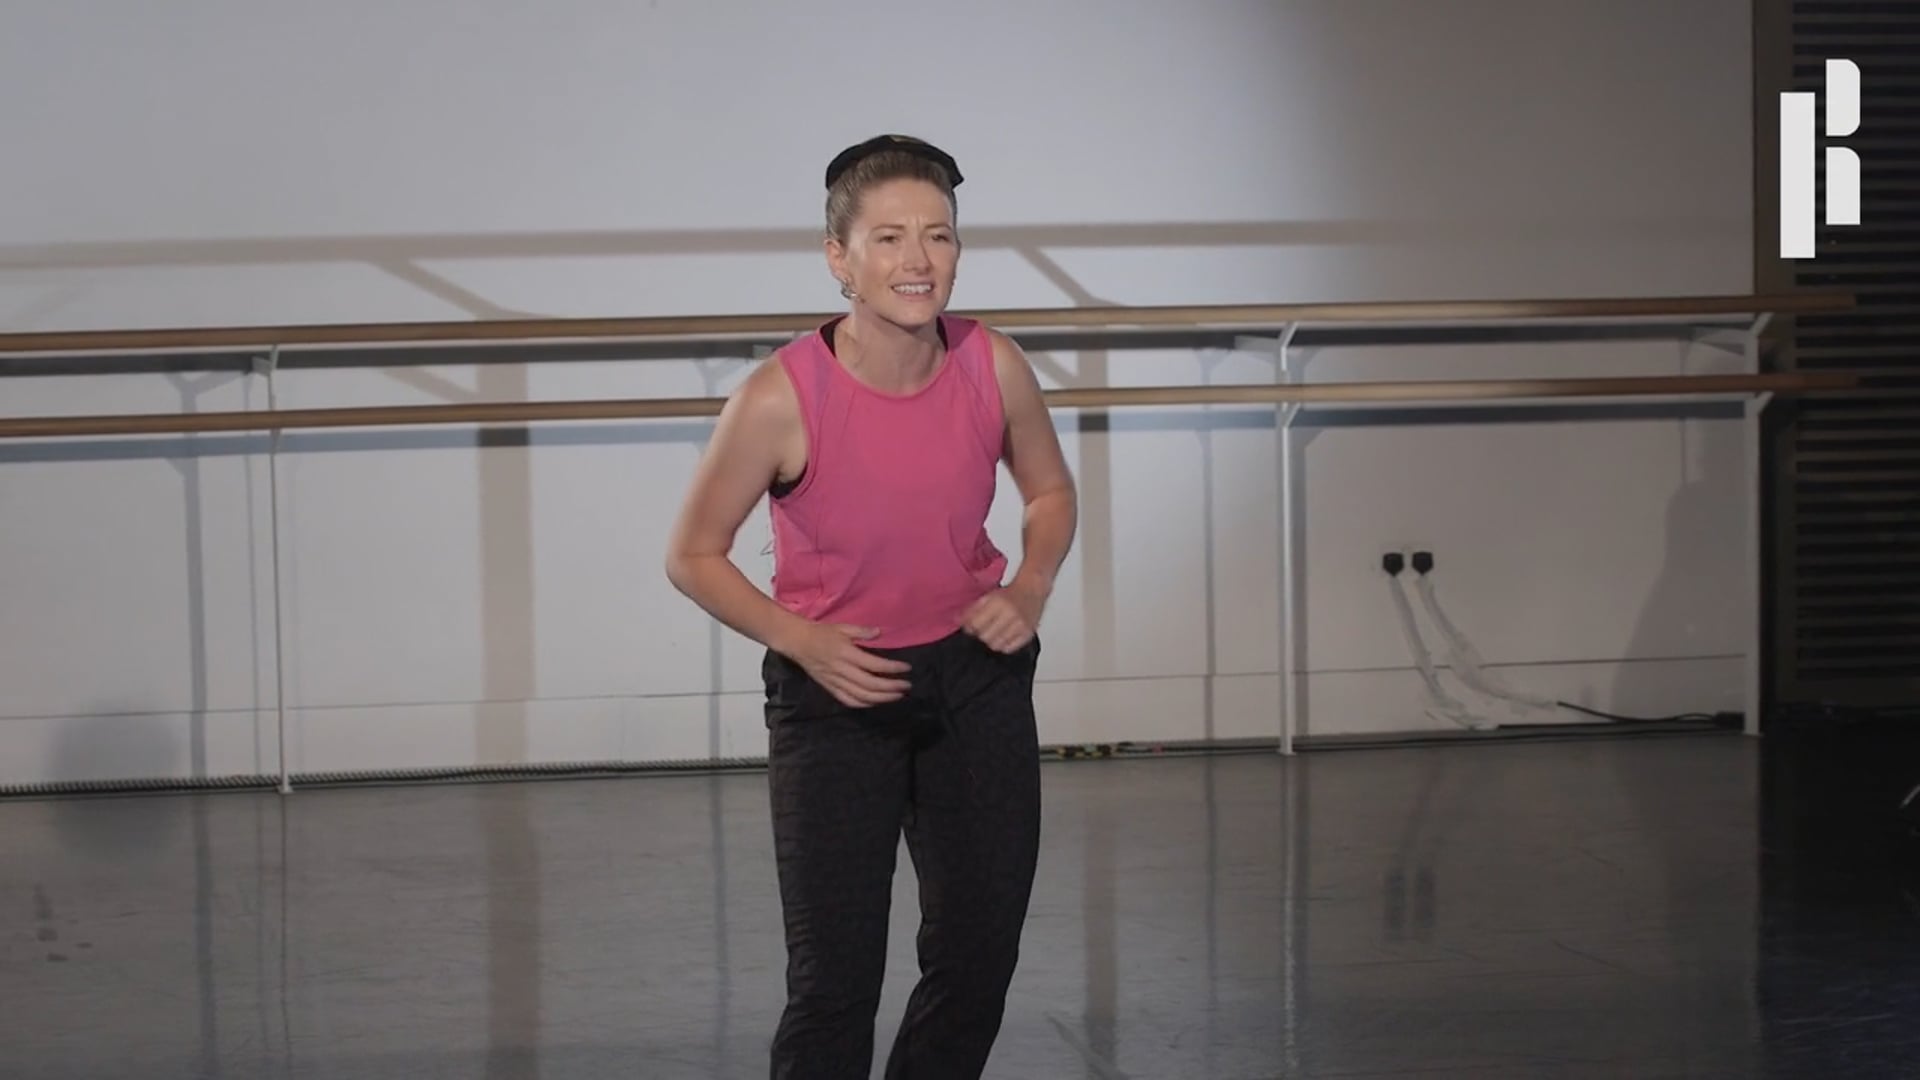 A woman in a pink top standing in a dance studio.